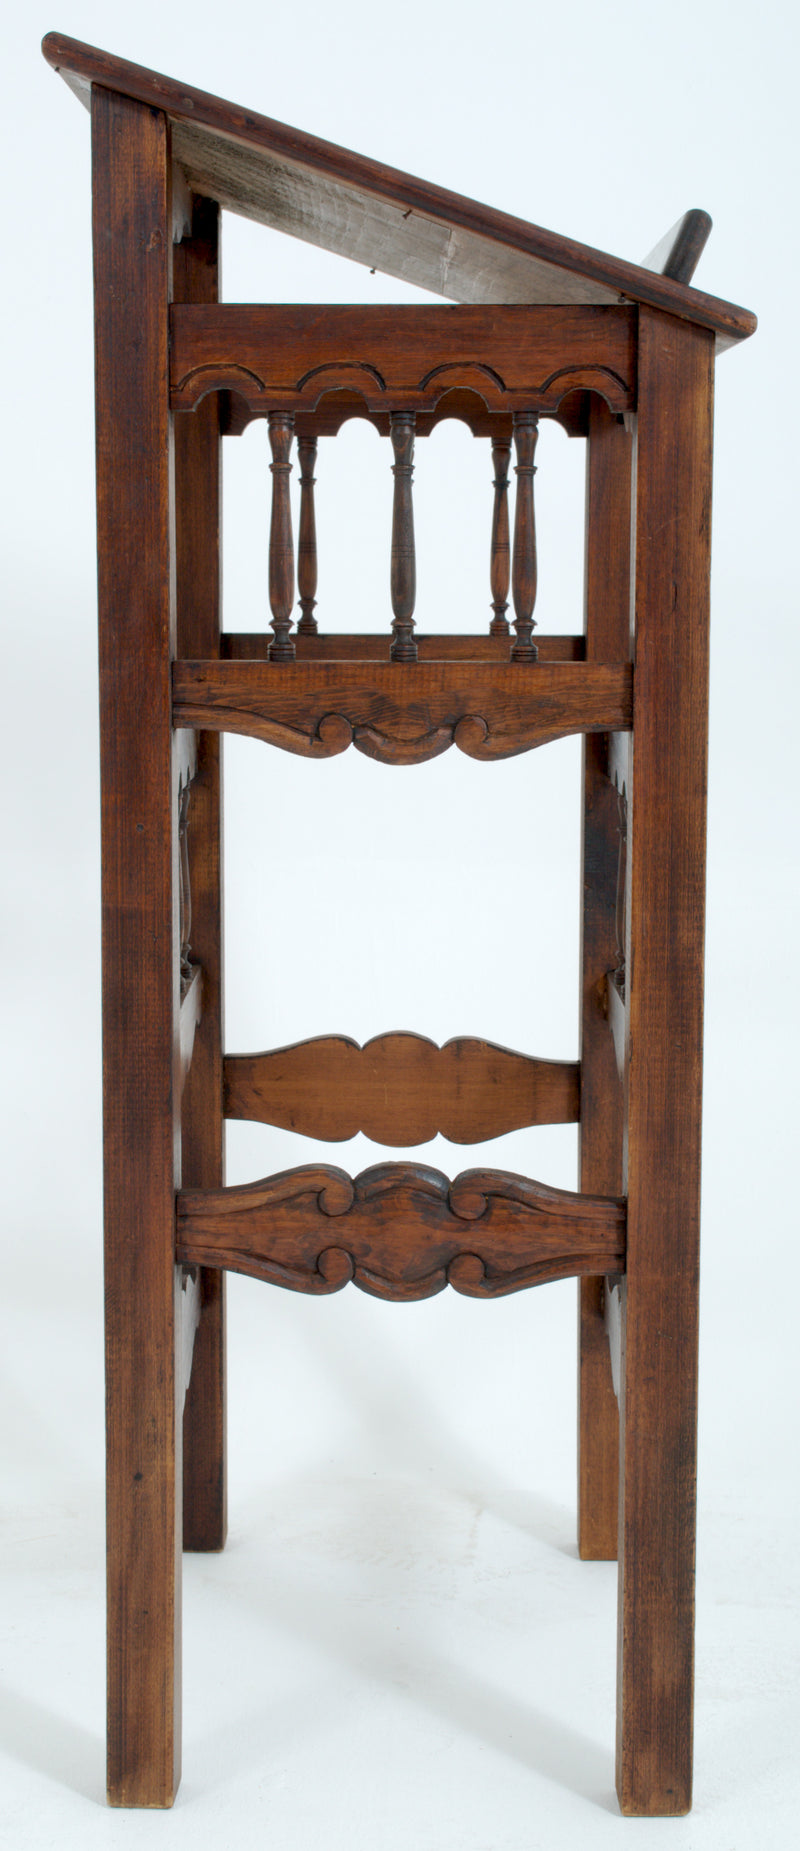 Antique French Provincial Walnut Lectern / Book / Music Stand, Circa 1880